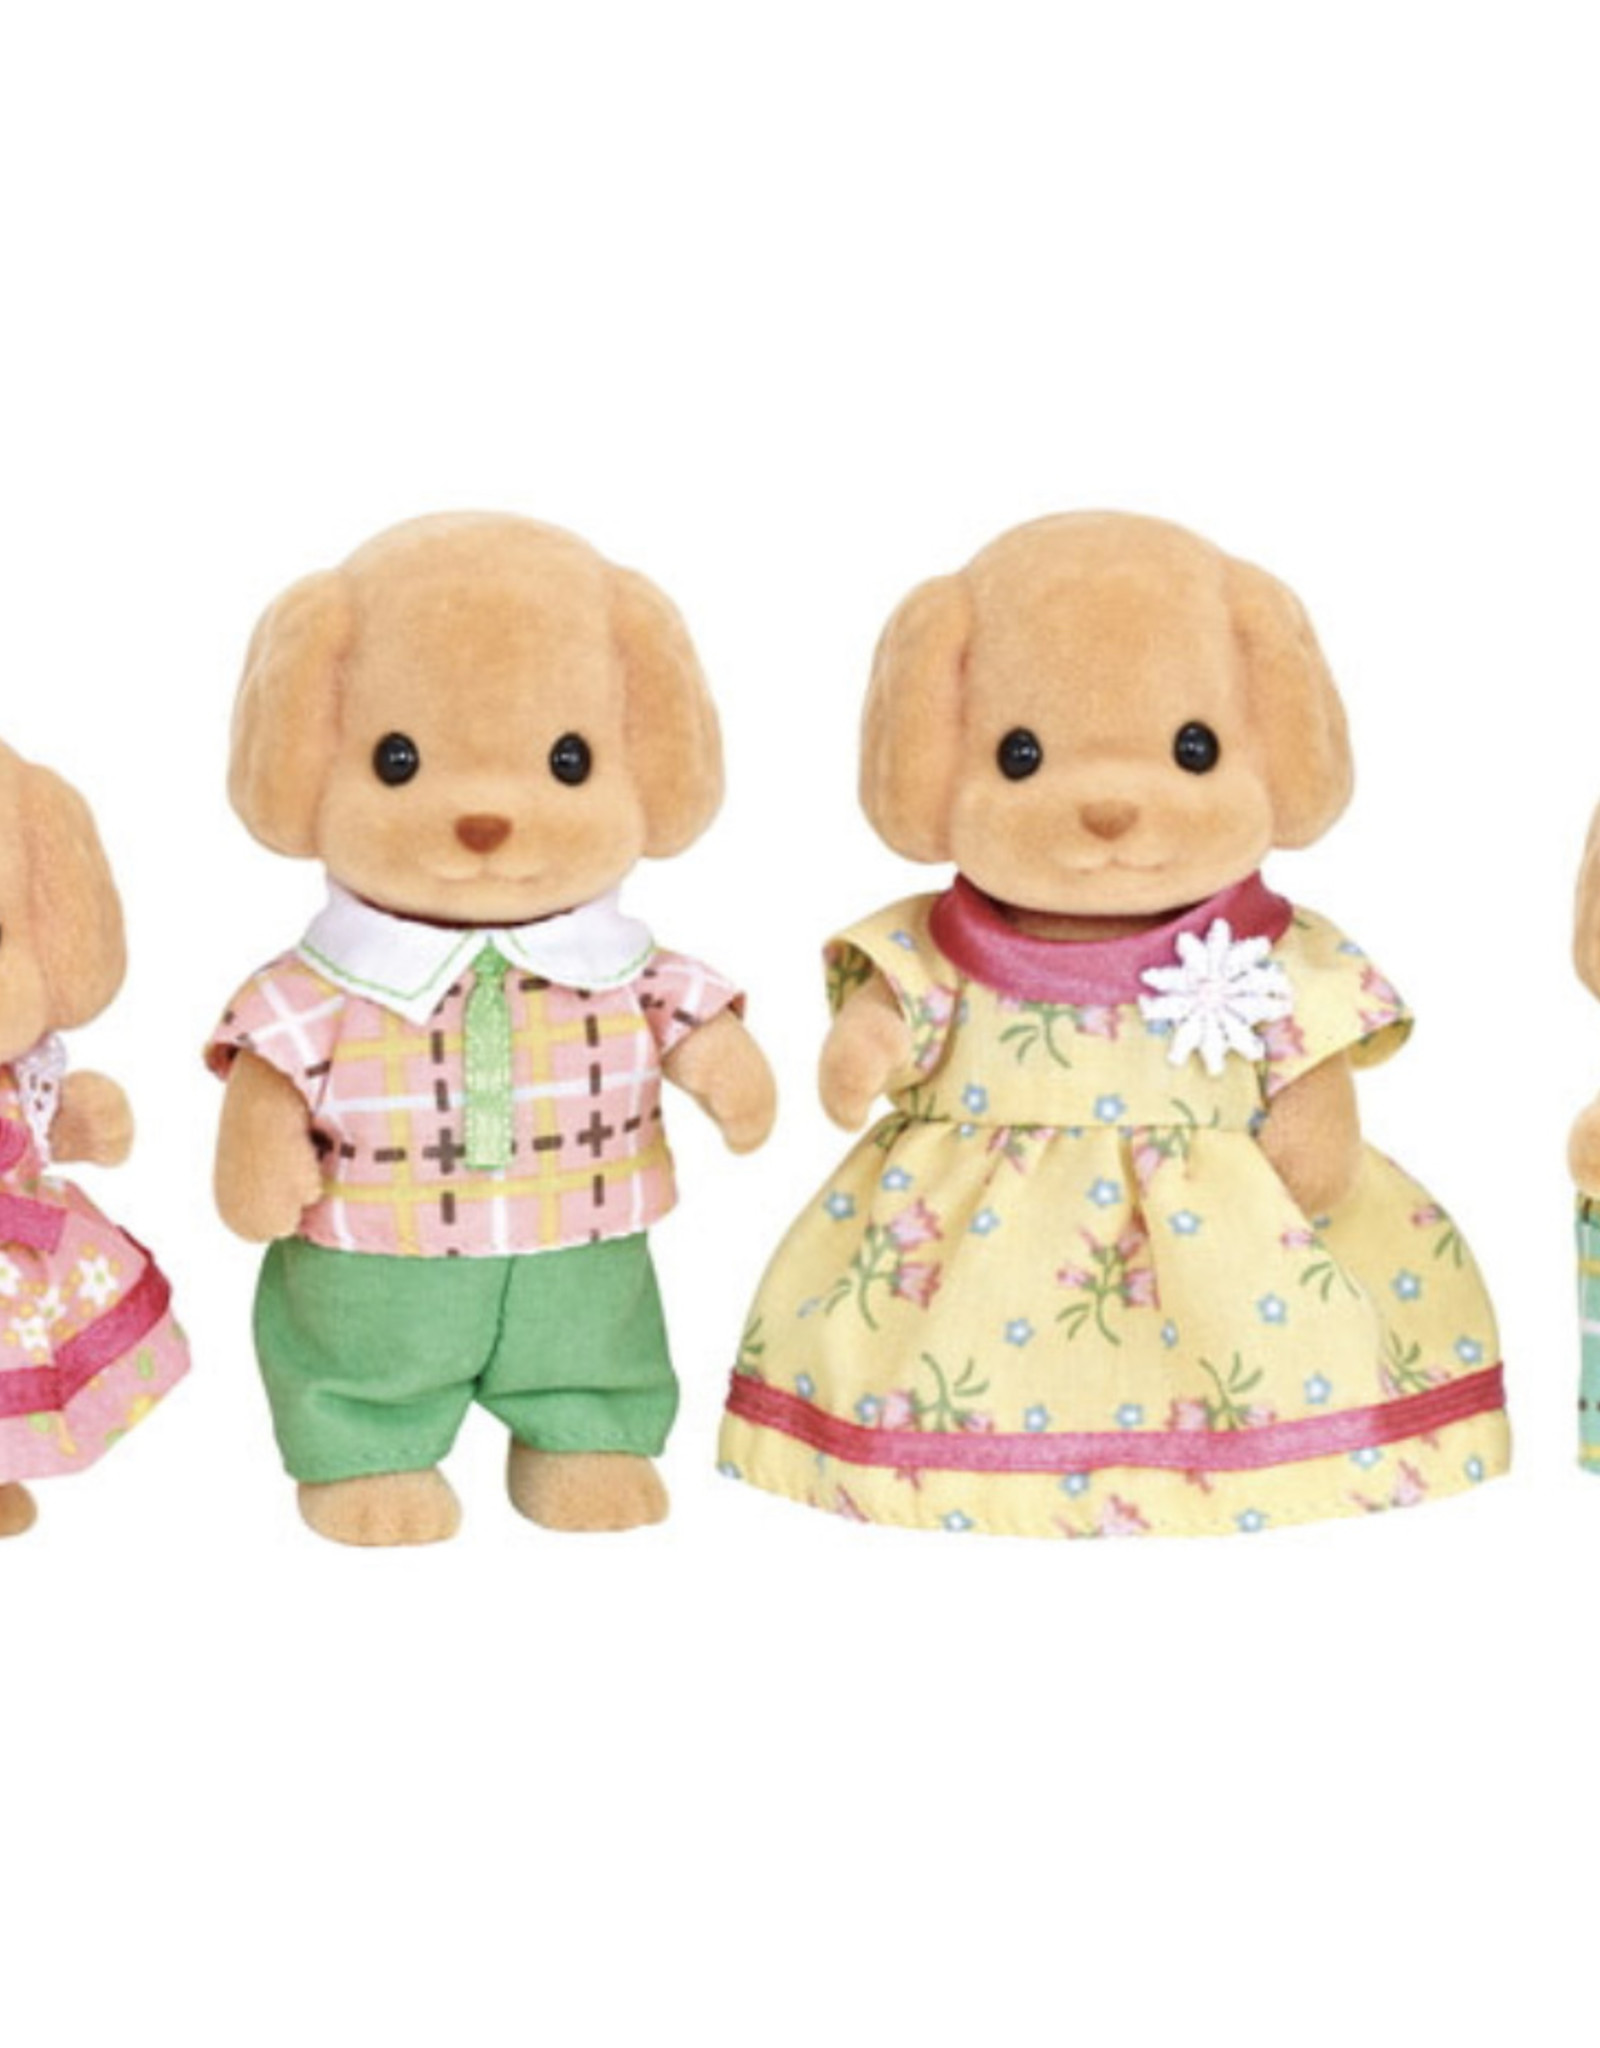 Calico Critters Calico Critters Toy Poodle Family